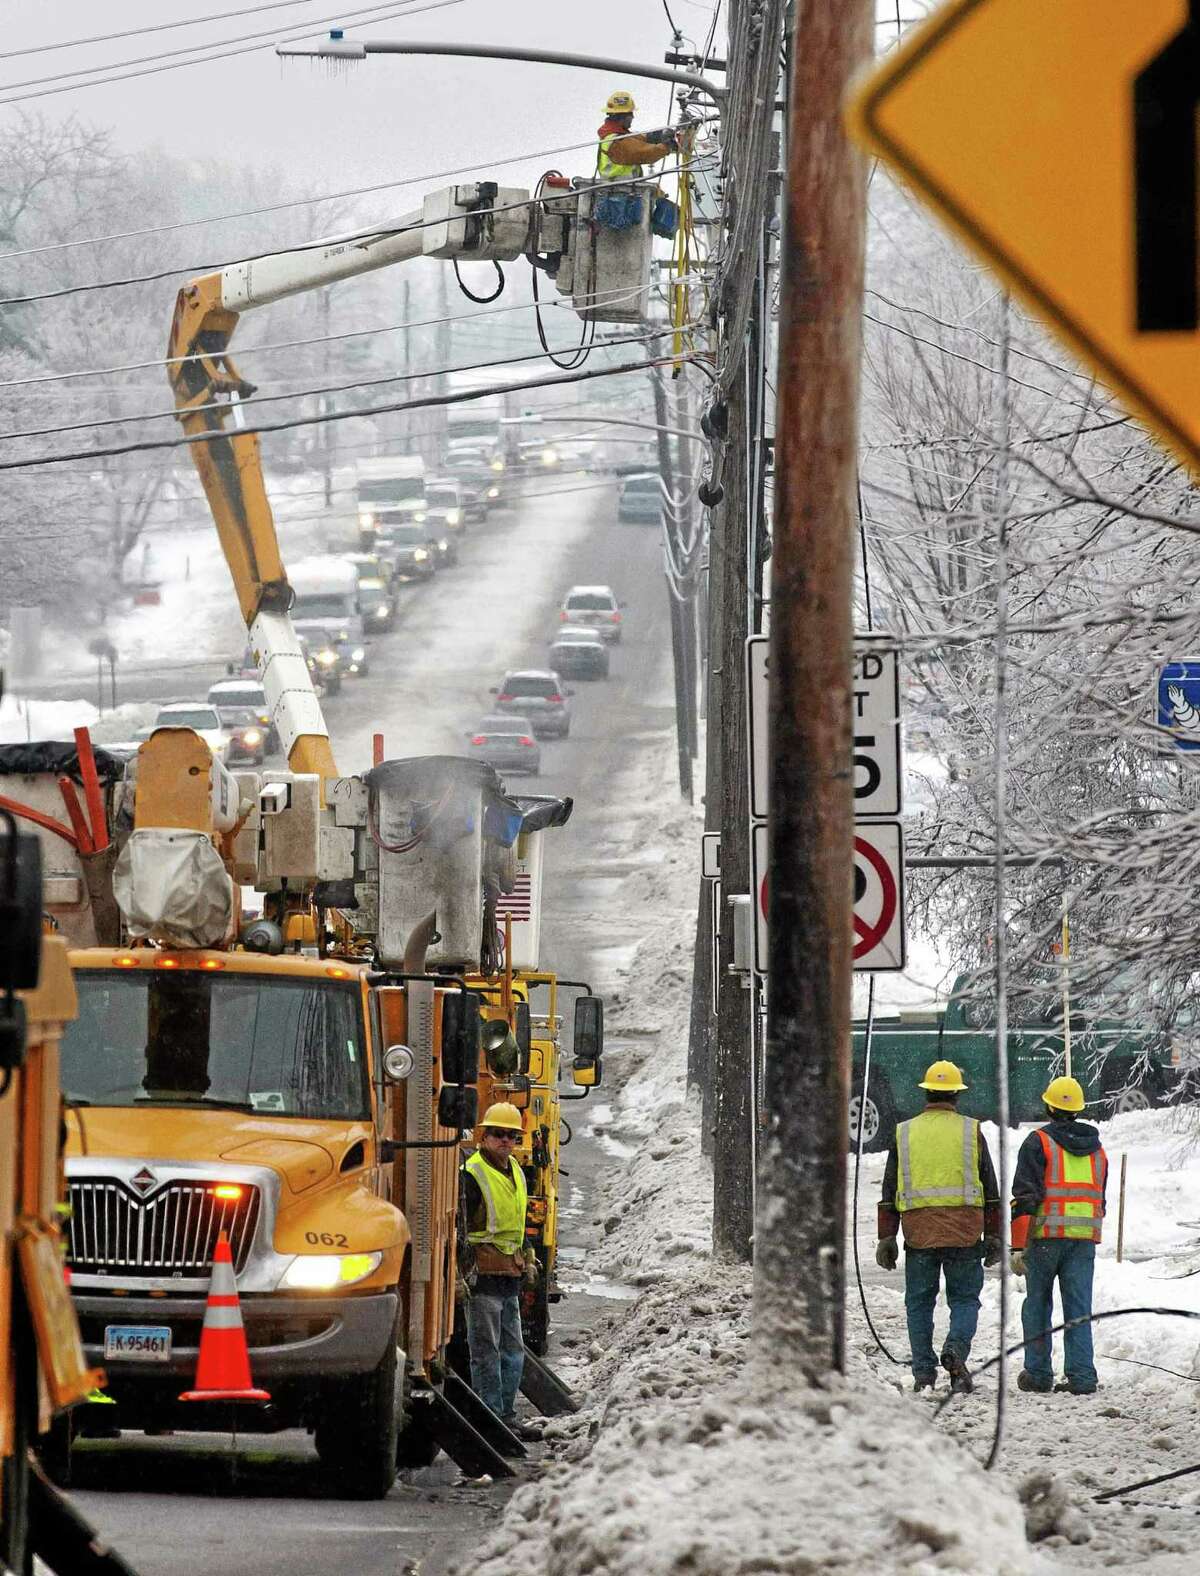 Utility crews respond to a downed power line at the intersection of Dorset Street and Kennedy Drive in South Burlington, Vt., on Monday, Dec. 23, 2013. From Michigan to Maine, hundreds of thousands remain without power days after a massive ice storm _ which one utility called the largest Christmas-week storm in its history _ blacked out homes and businesses in the Great Lakes and Northeast. (AP Photo/Burlington Free Press, Glenn Russell)